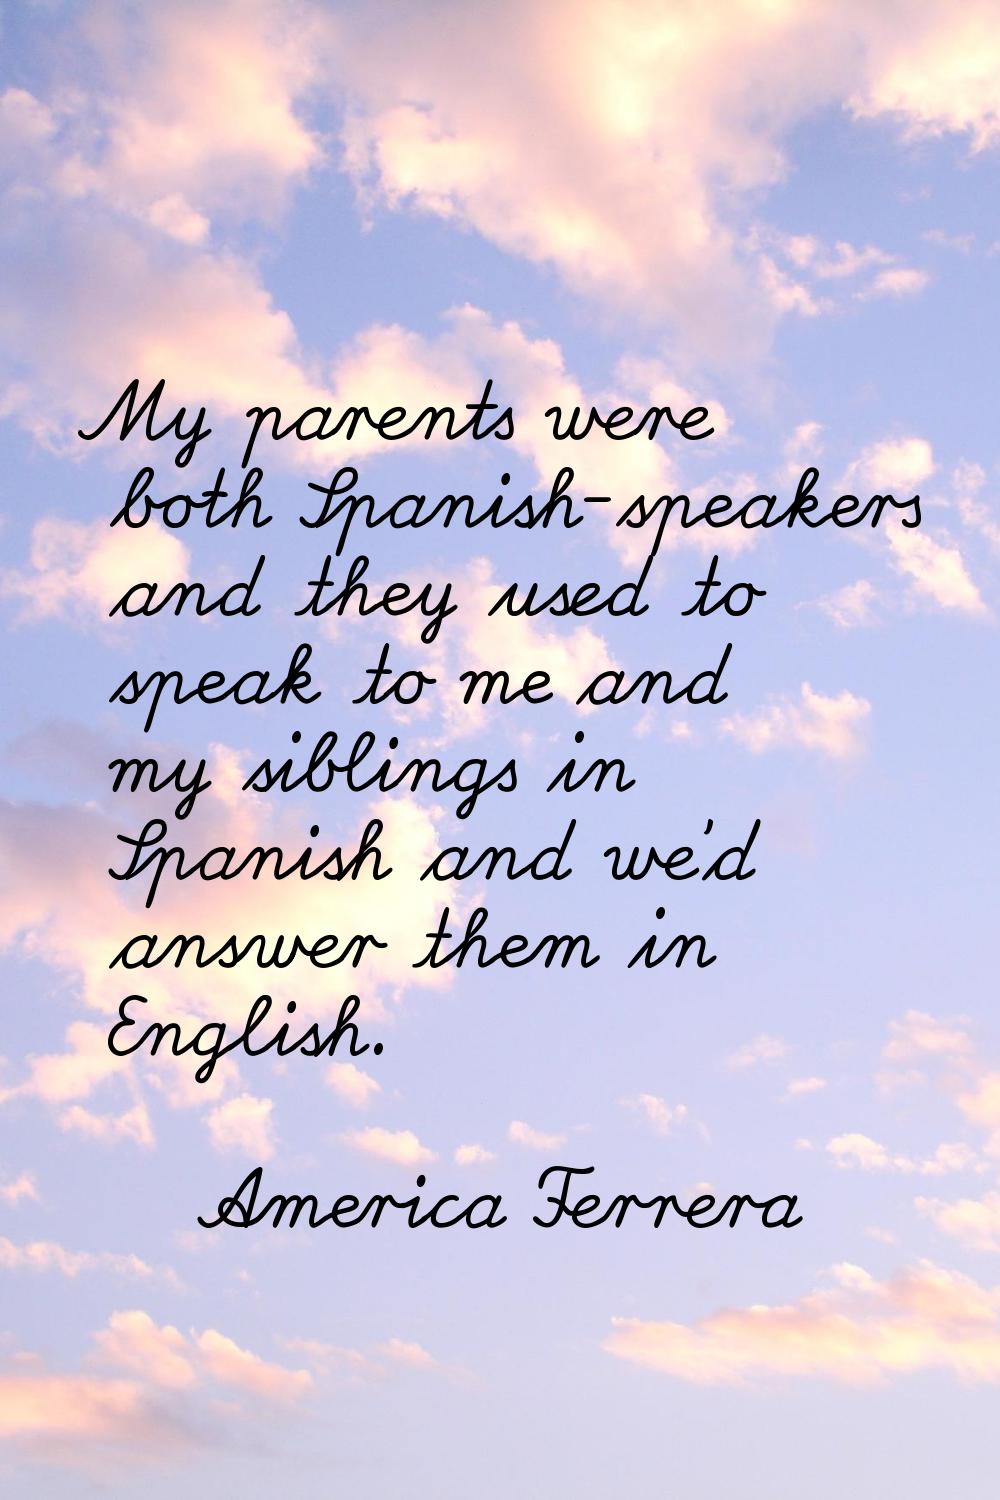 My parents were both Spanish-speakers and they used to speak to me and my siblings in Spanish and w